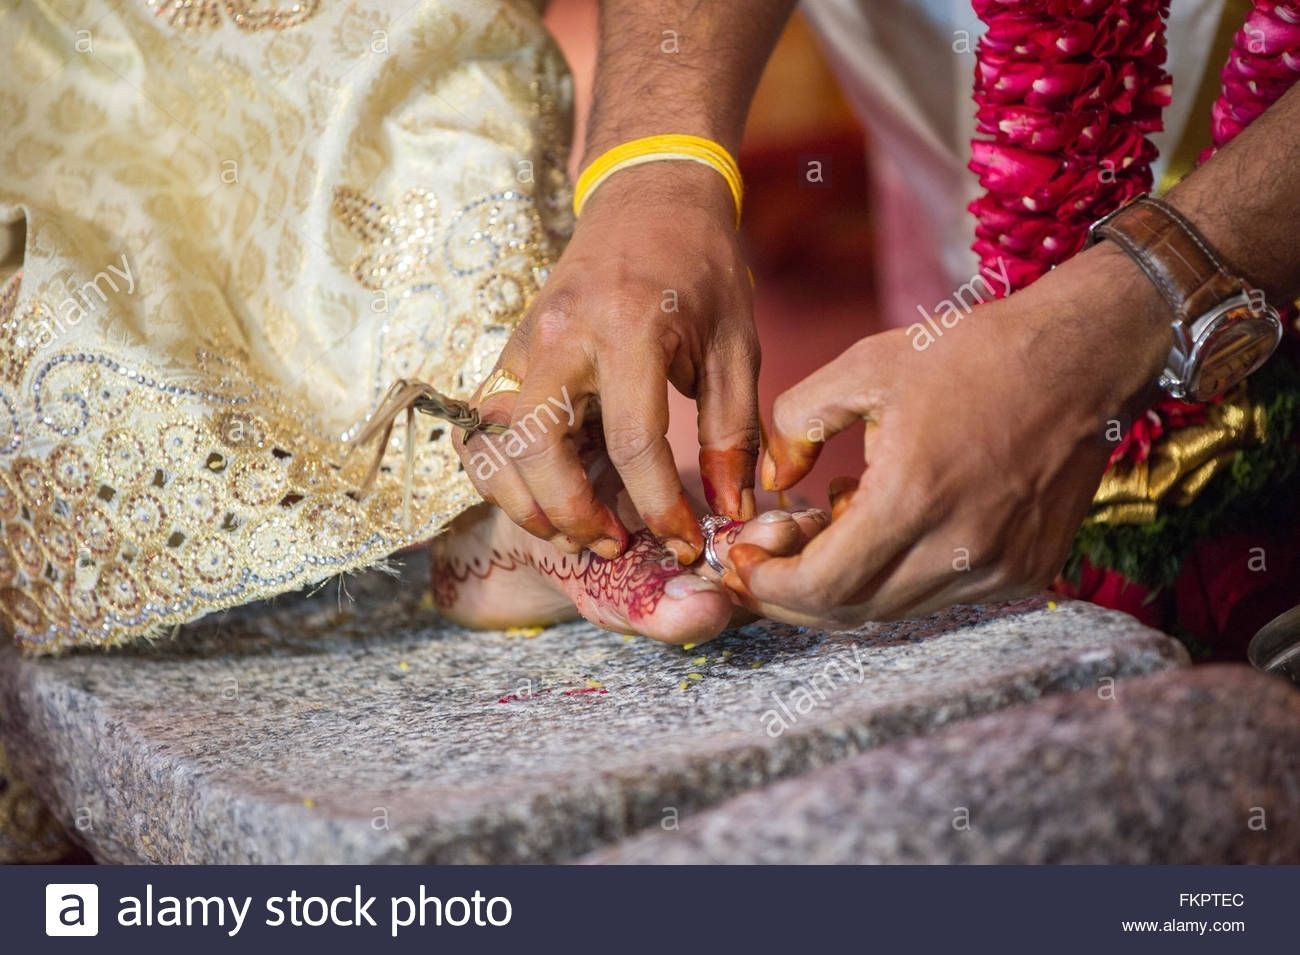 Toe Ring Stock Photos & Toe Ring Stock Images – Alamy With Regard To Most Recently Released Wedding Toe Rings (Gallery 13 of 15)